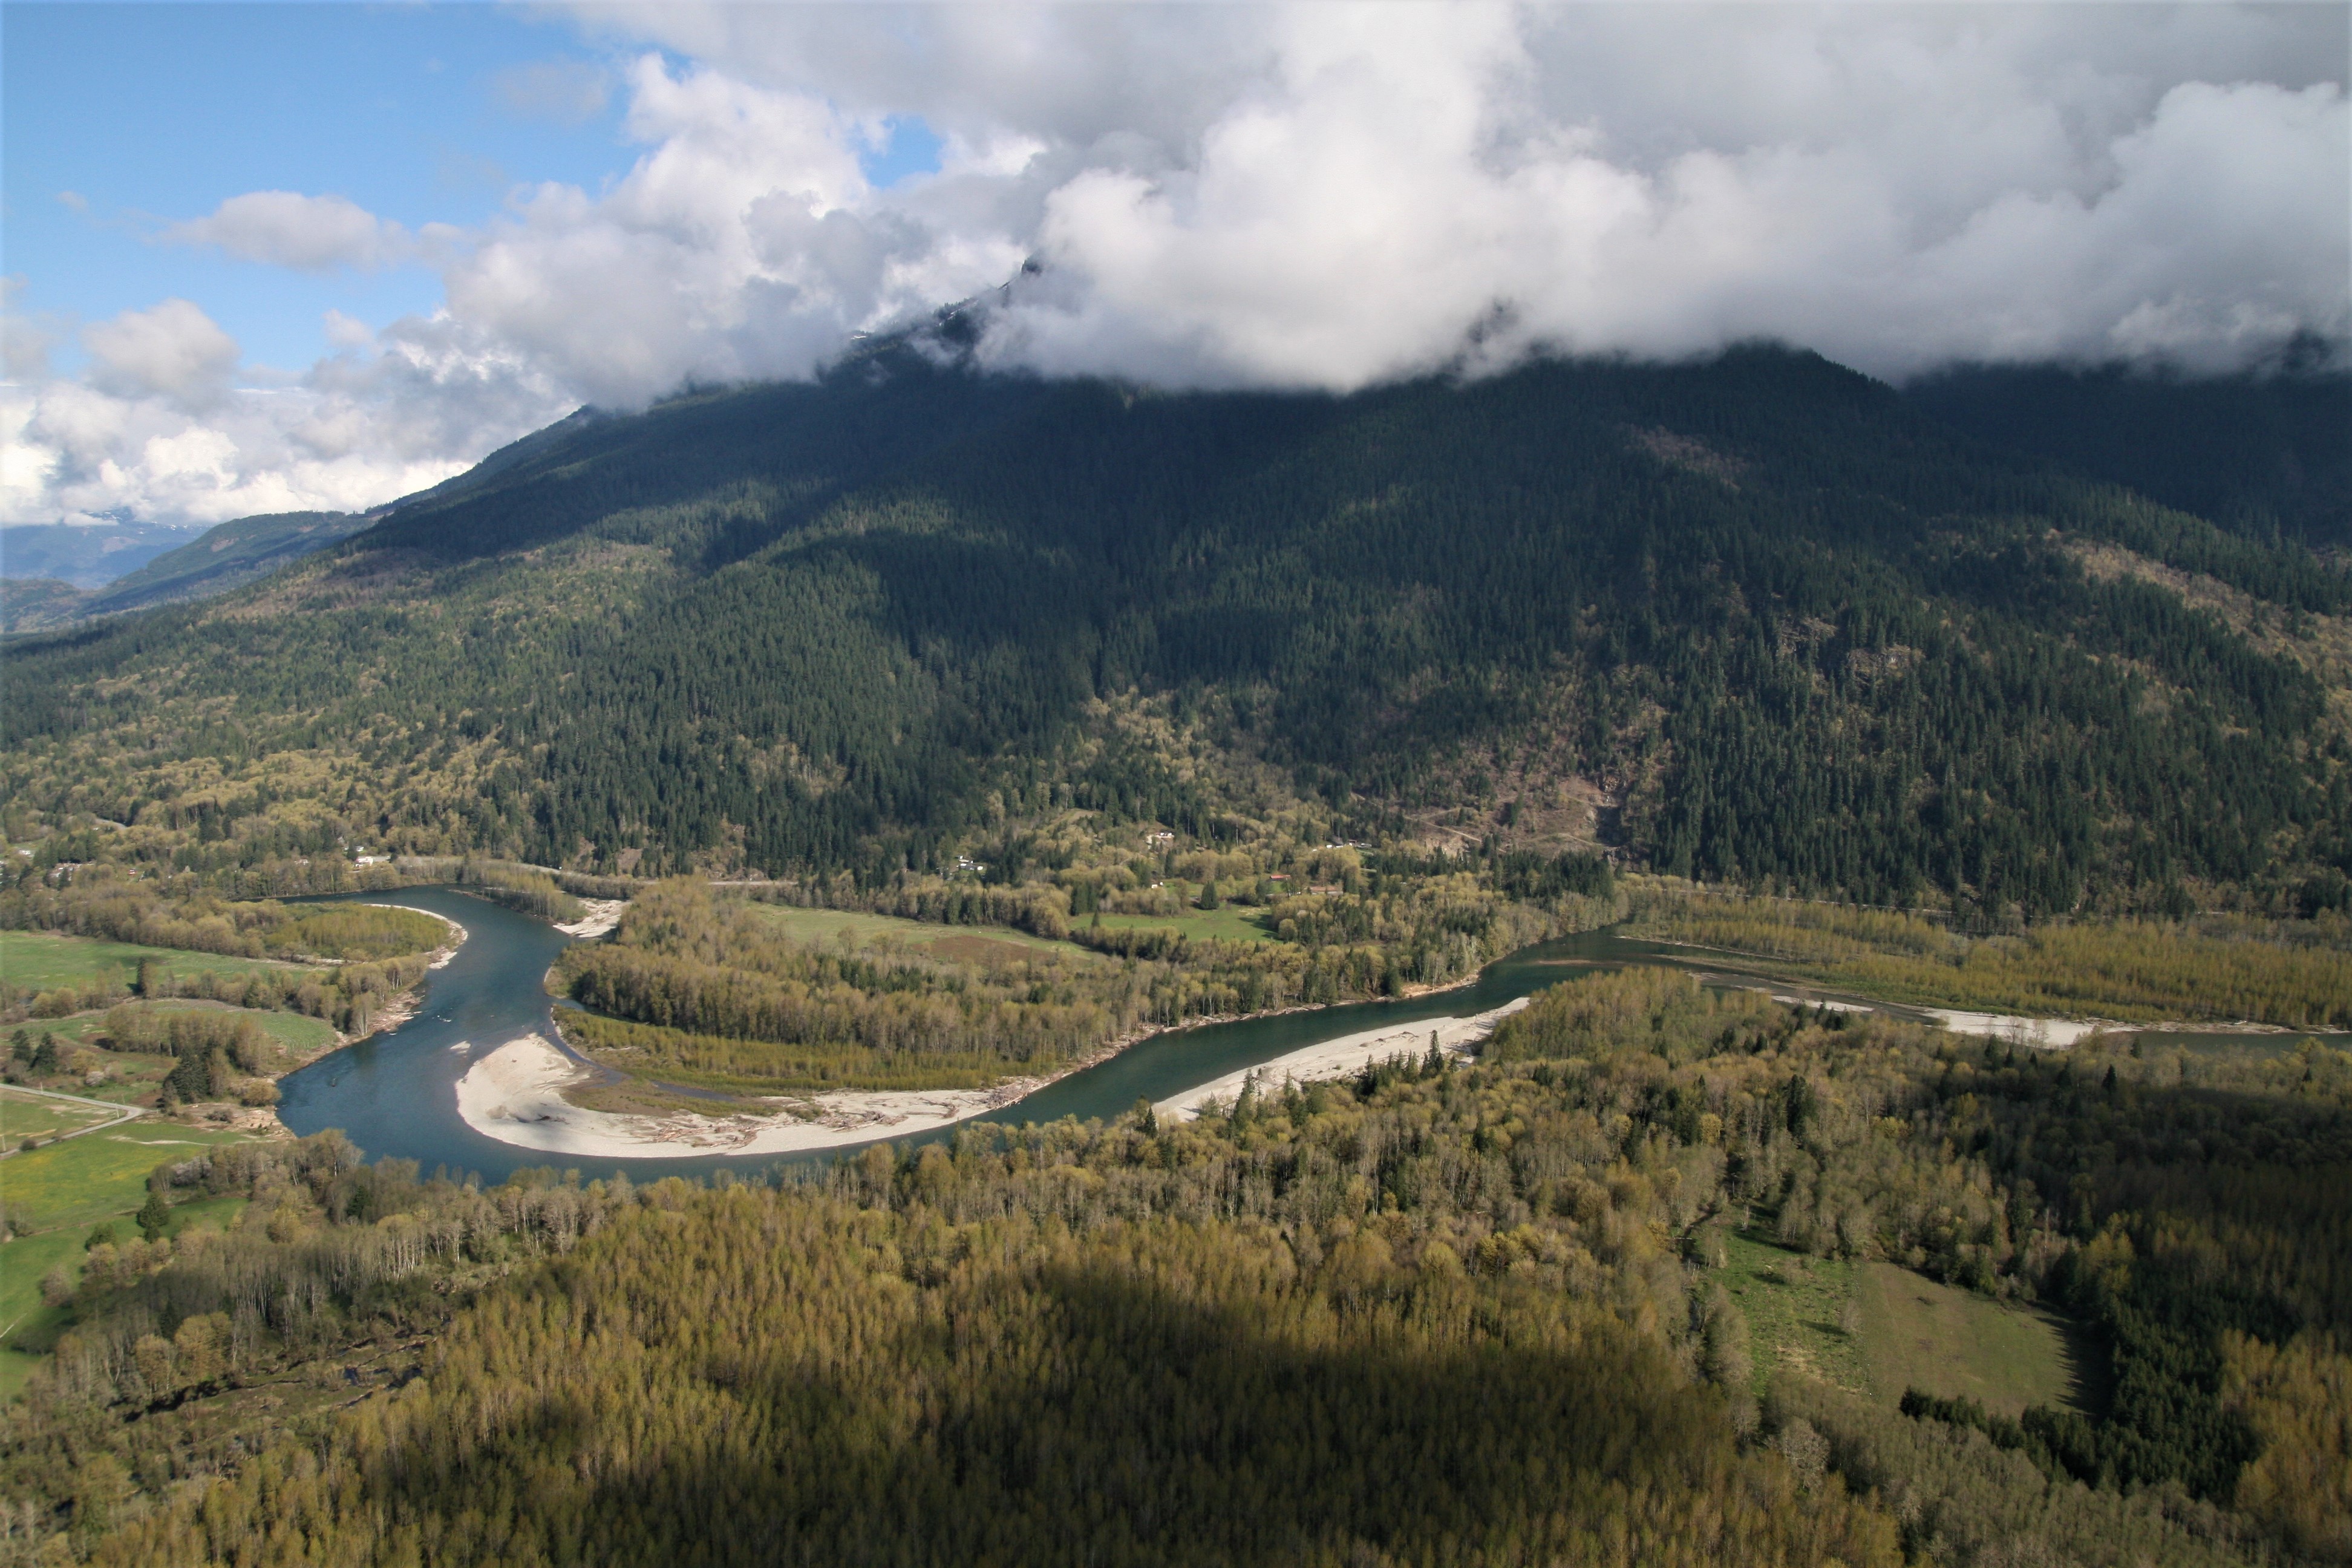 View from Sauk Mountain looking south over the Skagit River. Aerial photography by Andy Cline.